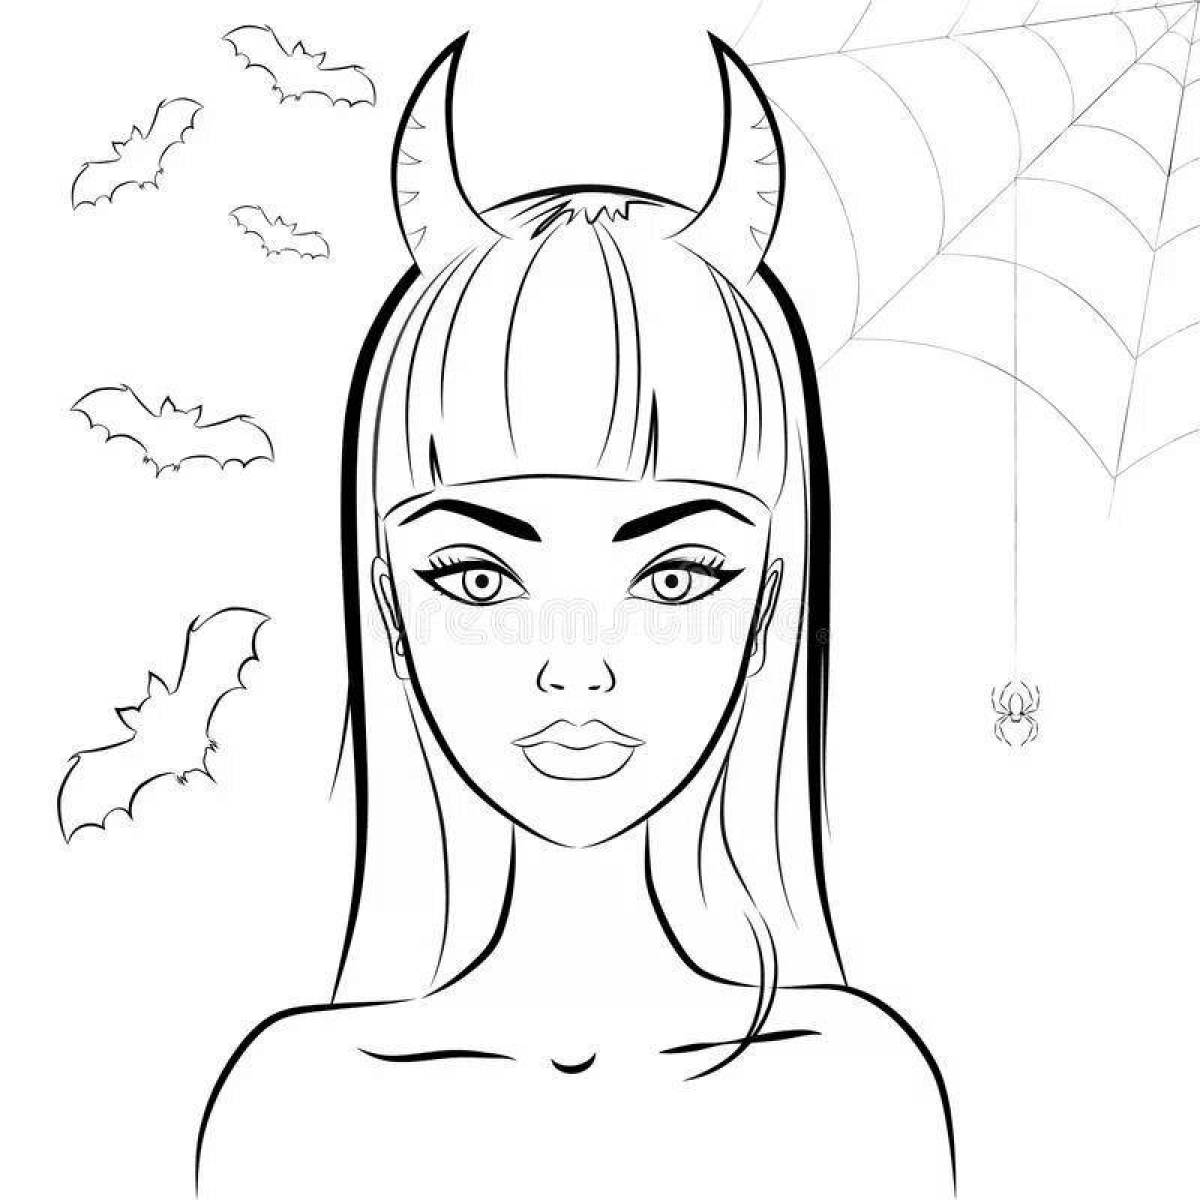 Girls with horns #2